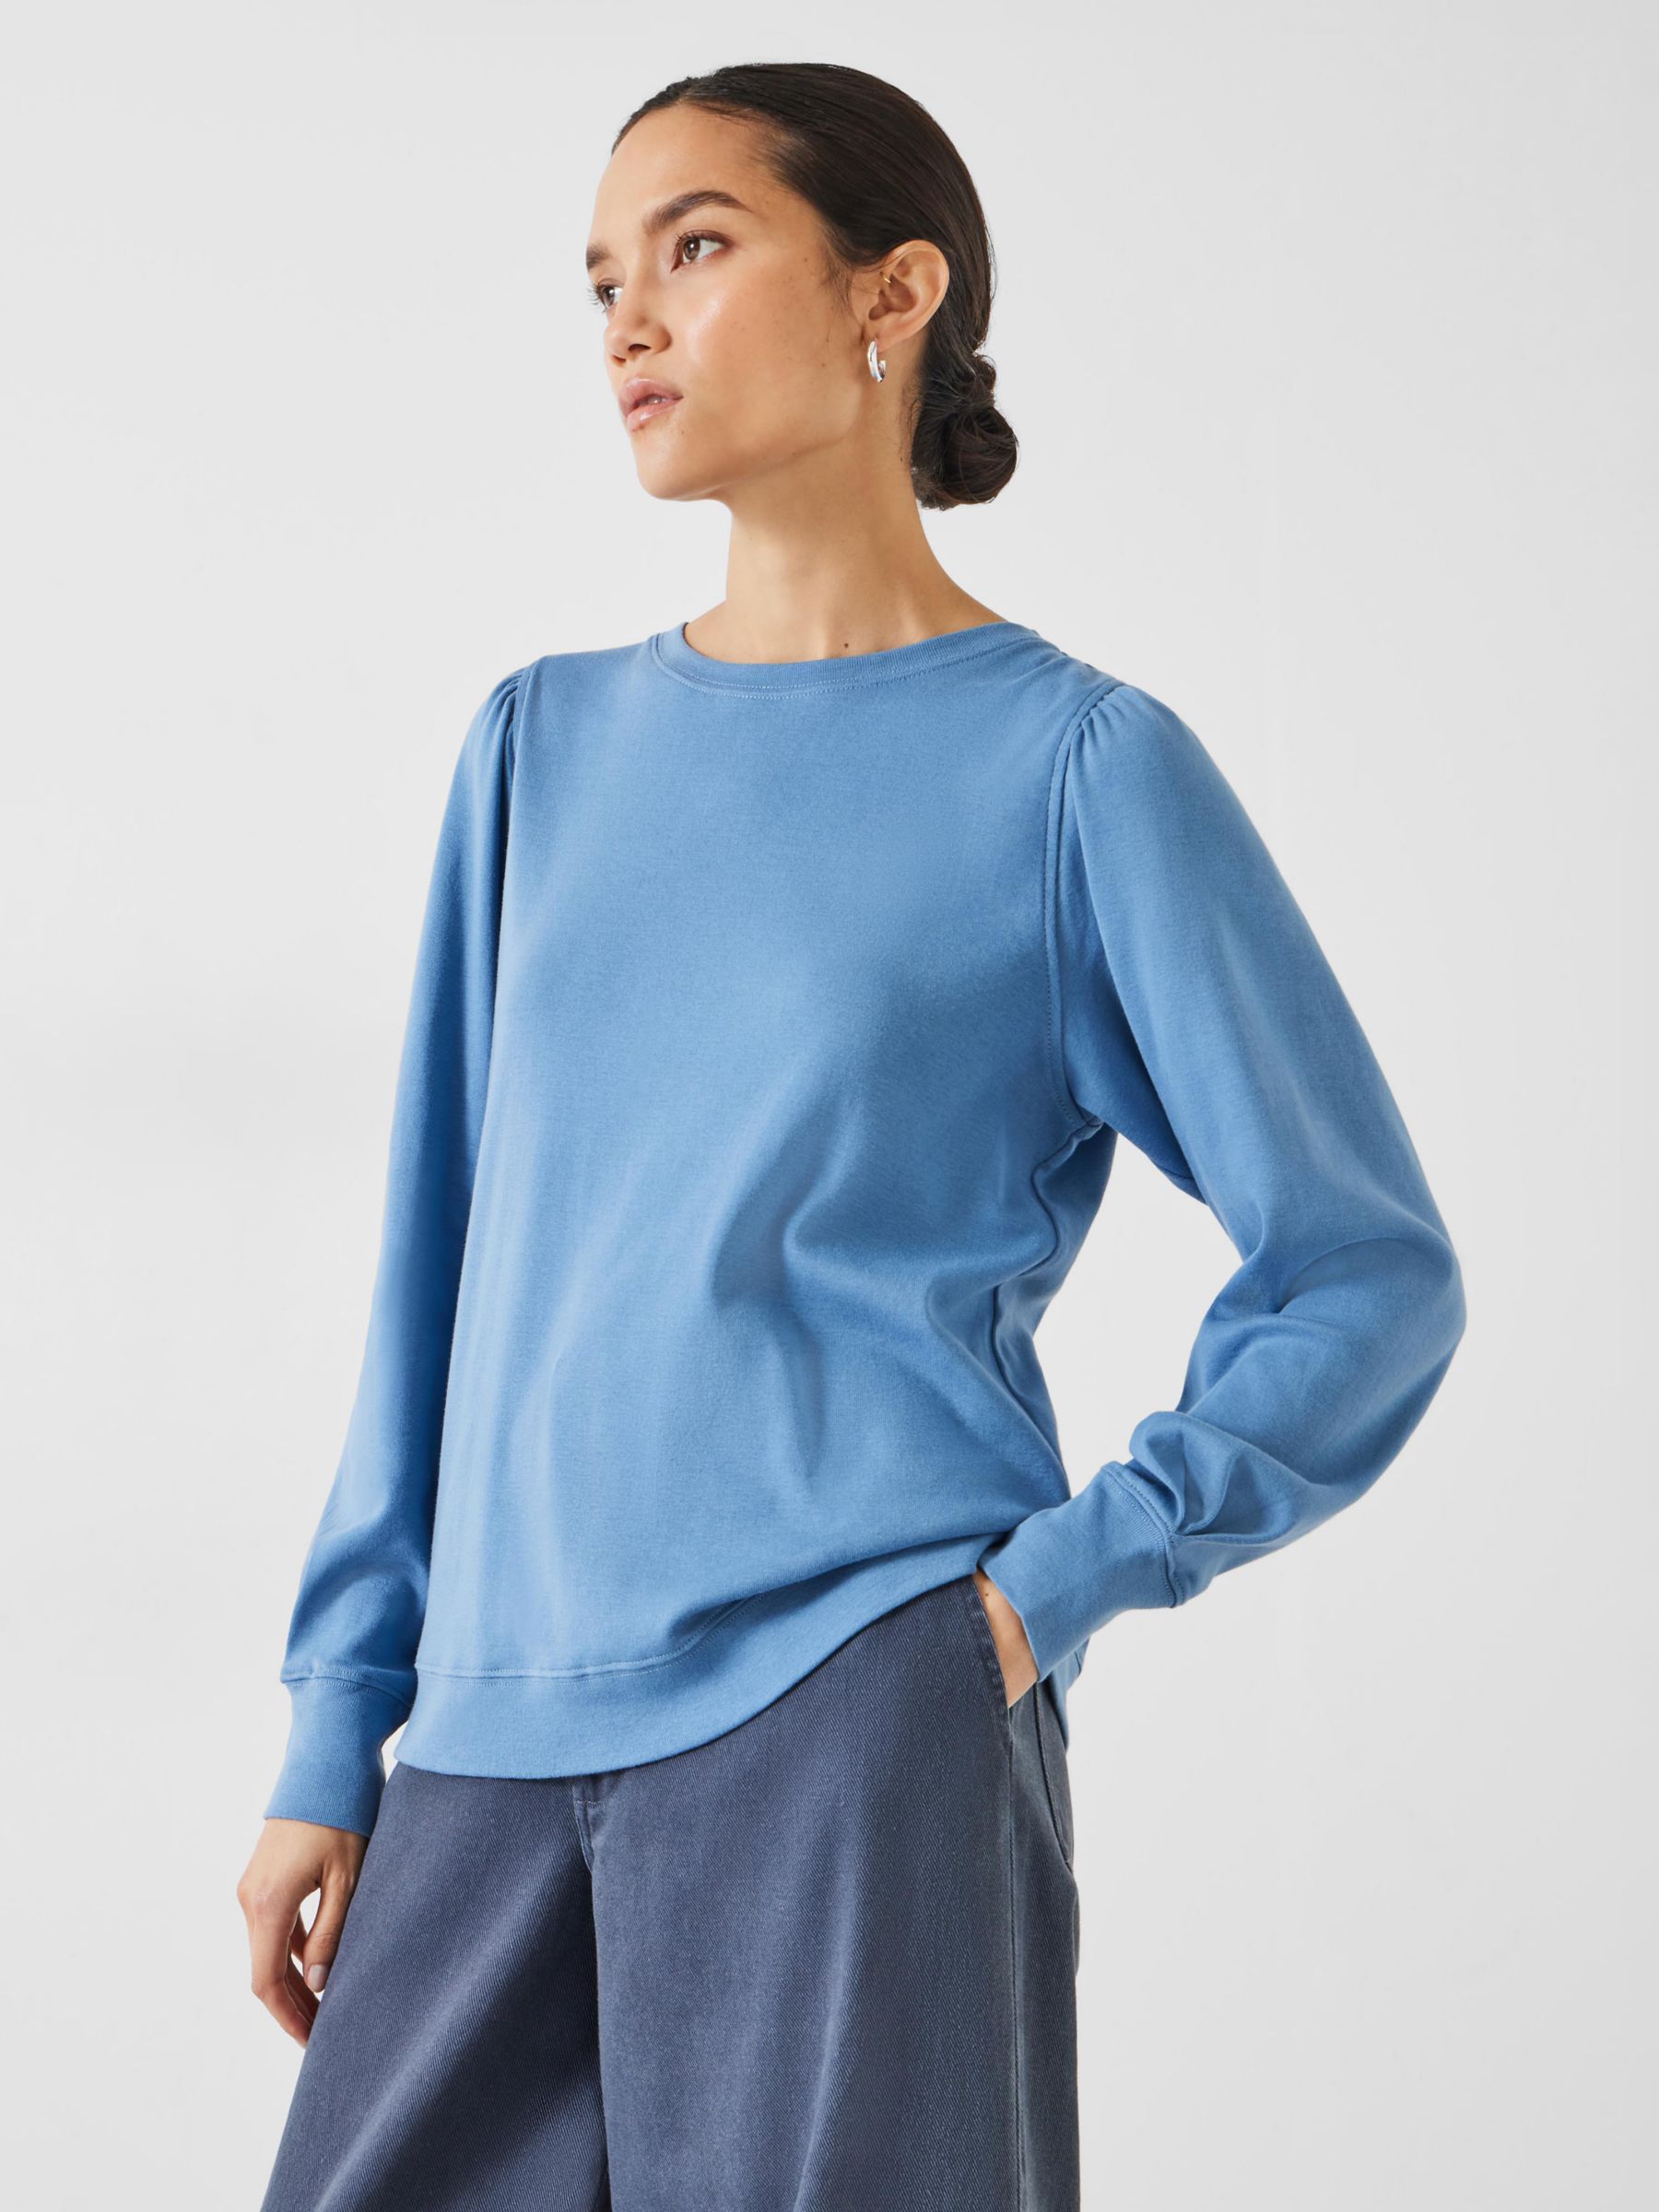 HUSH Emily Puff Sleeve Cotton Jersey Top, Dusty Blue at John Lewis ...